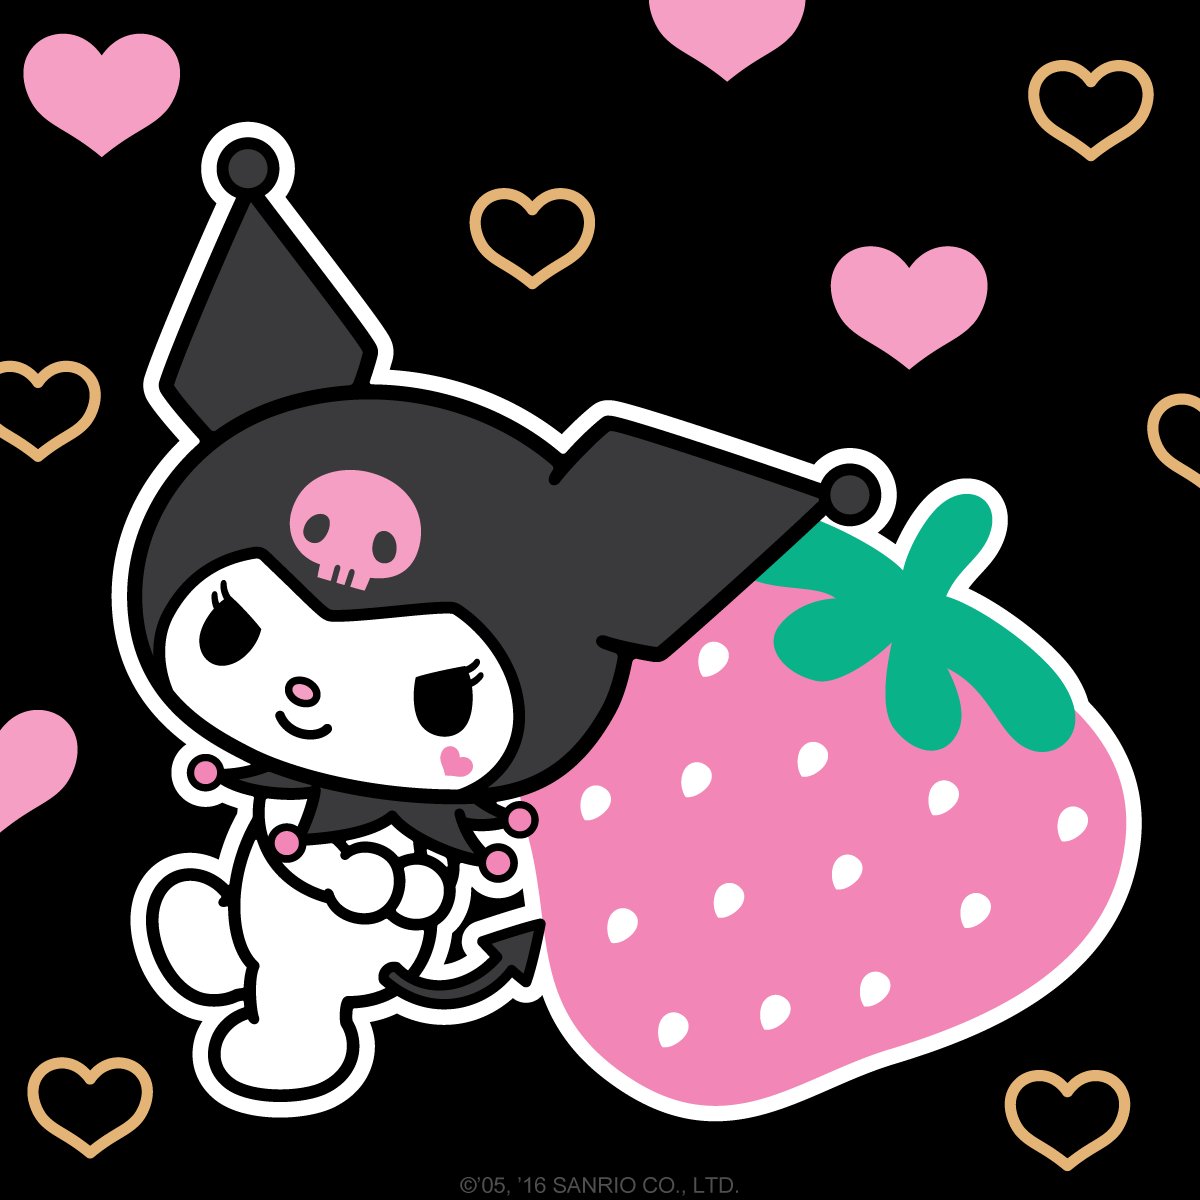 Sanrio - #Kuromi has a mischievous look in her eye for #PickStrawberriesDay. What tricks do you think she is up to today?